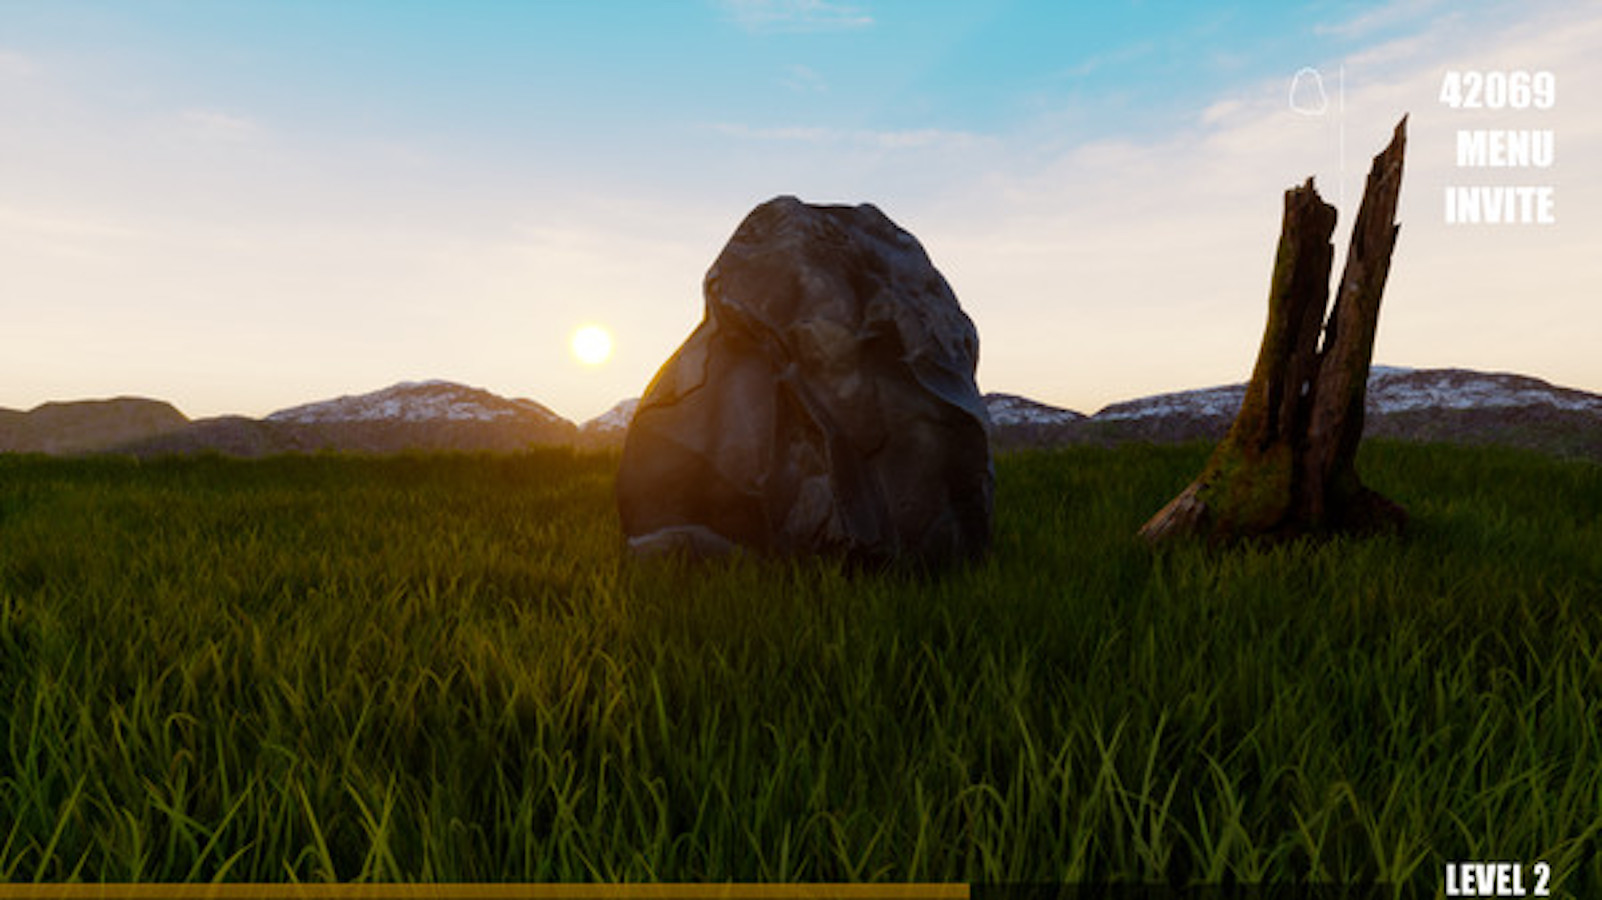 A rock sits in the center of the frame partially blocking the sprawling landscape behind it. In the distance, the sun is beginning to set over a mountain range, casting shadows on the lush green grass.